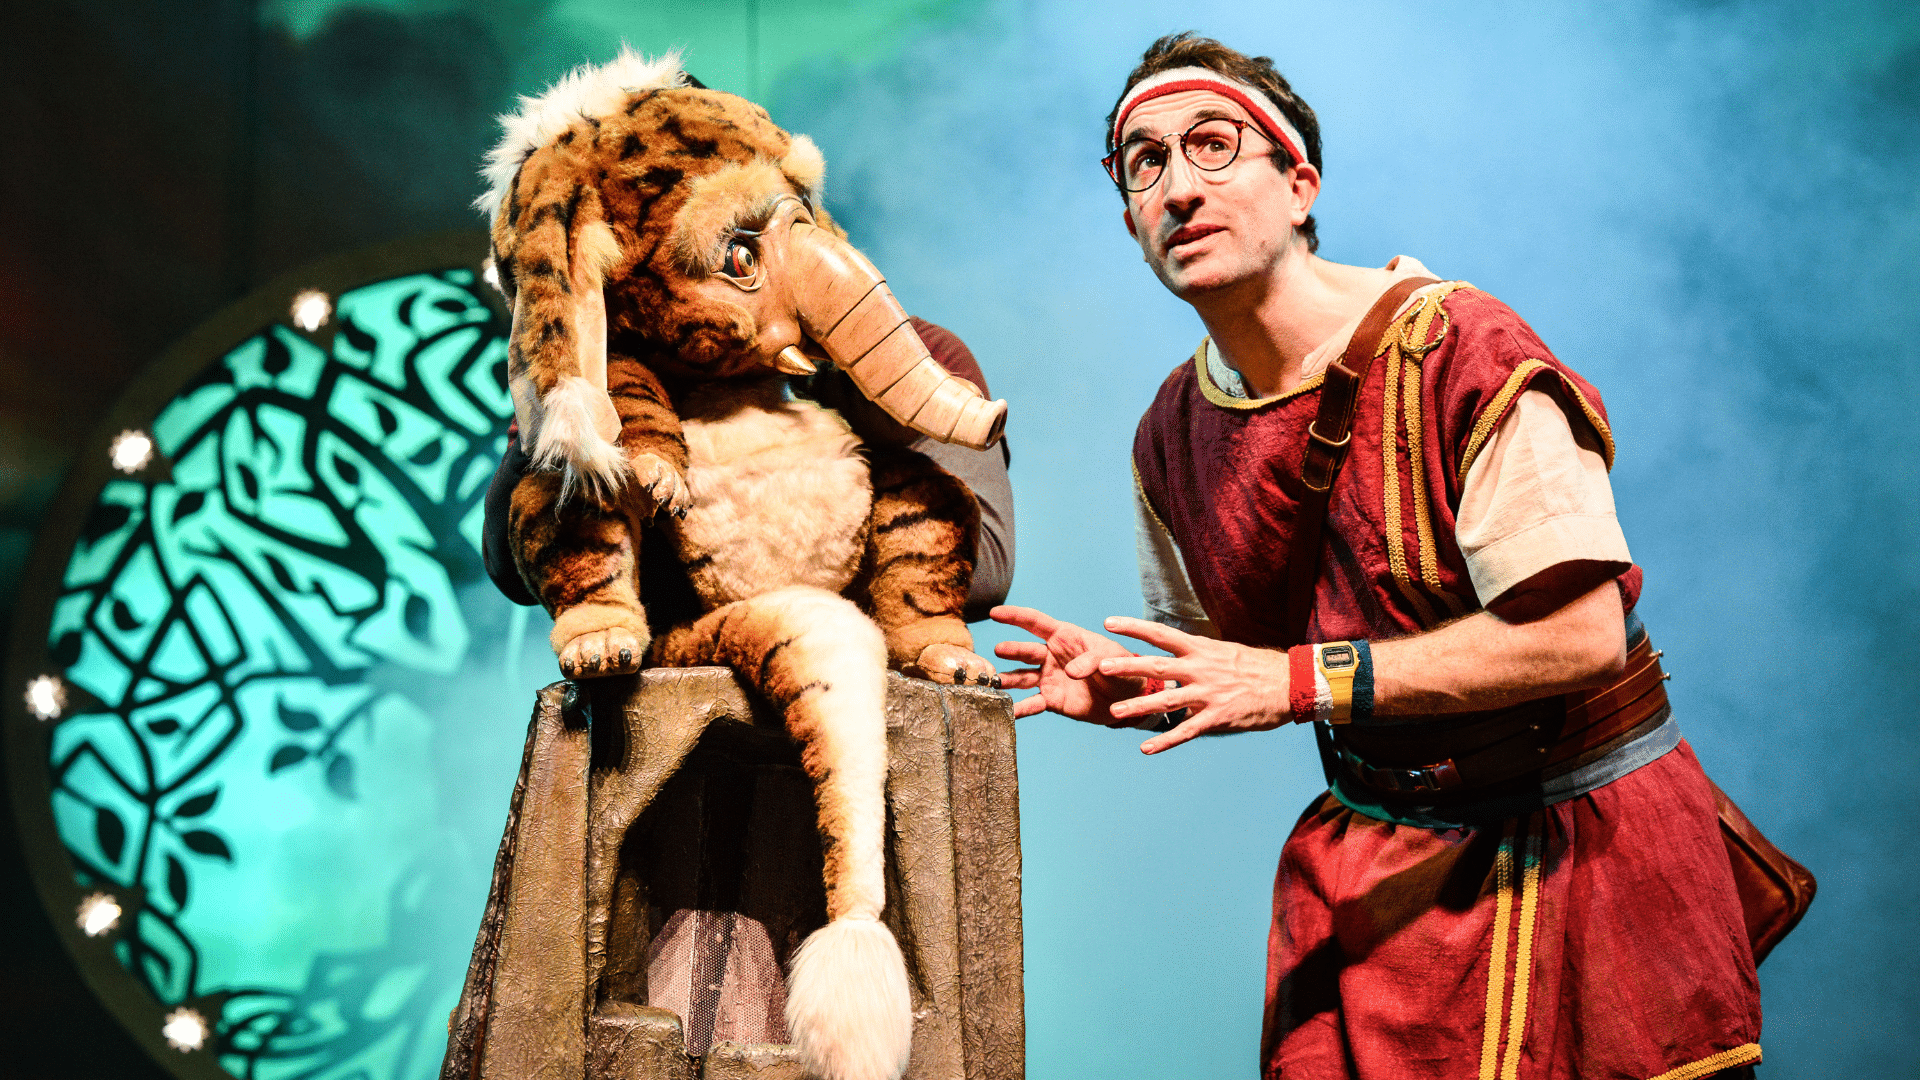 Dragons & Mythical Beasts production photo. A bespectacled man in a red tunic and headband speaks and gestures. Beside him, squatting on a tree stump, is a large, tiger-striped rodent with floppy ears, and a small trunk and tusks. It listens to the man with warm, intelligent eyes.